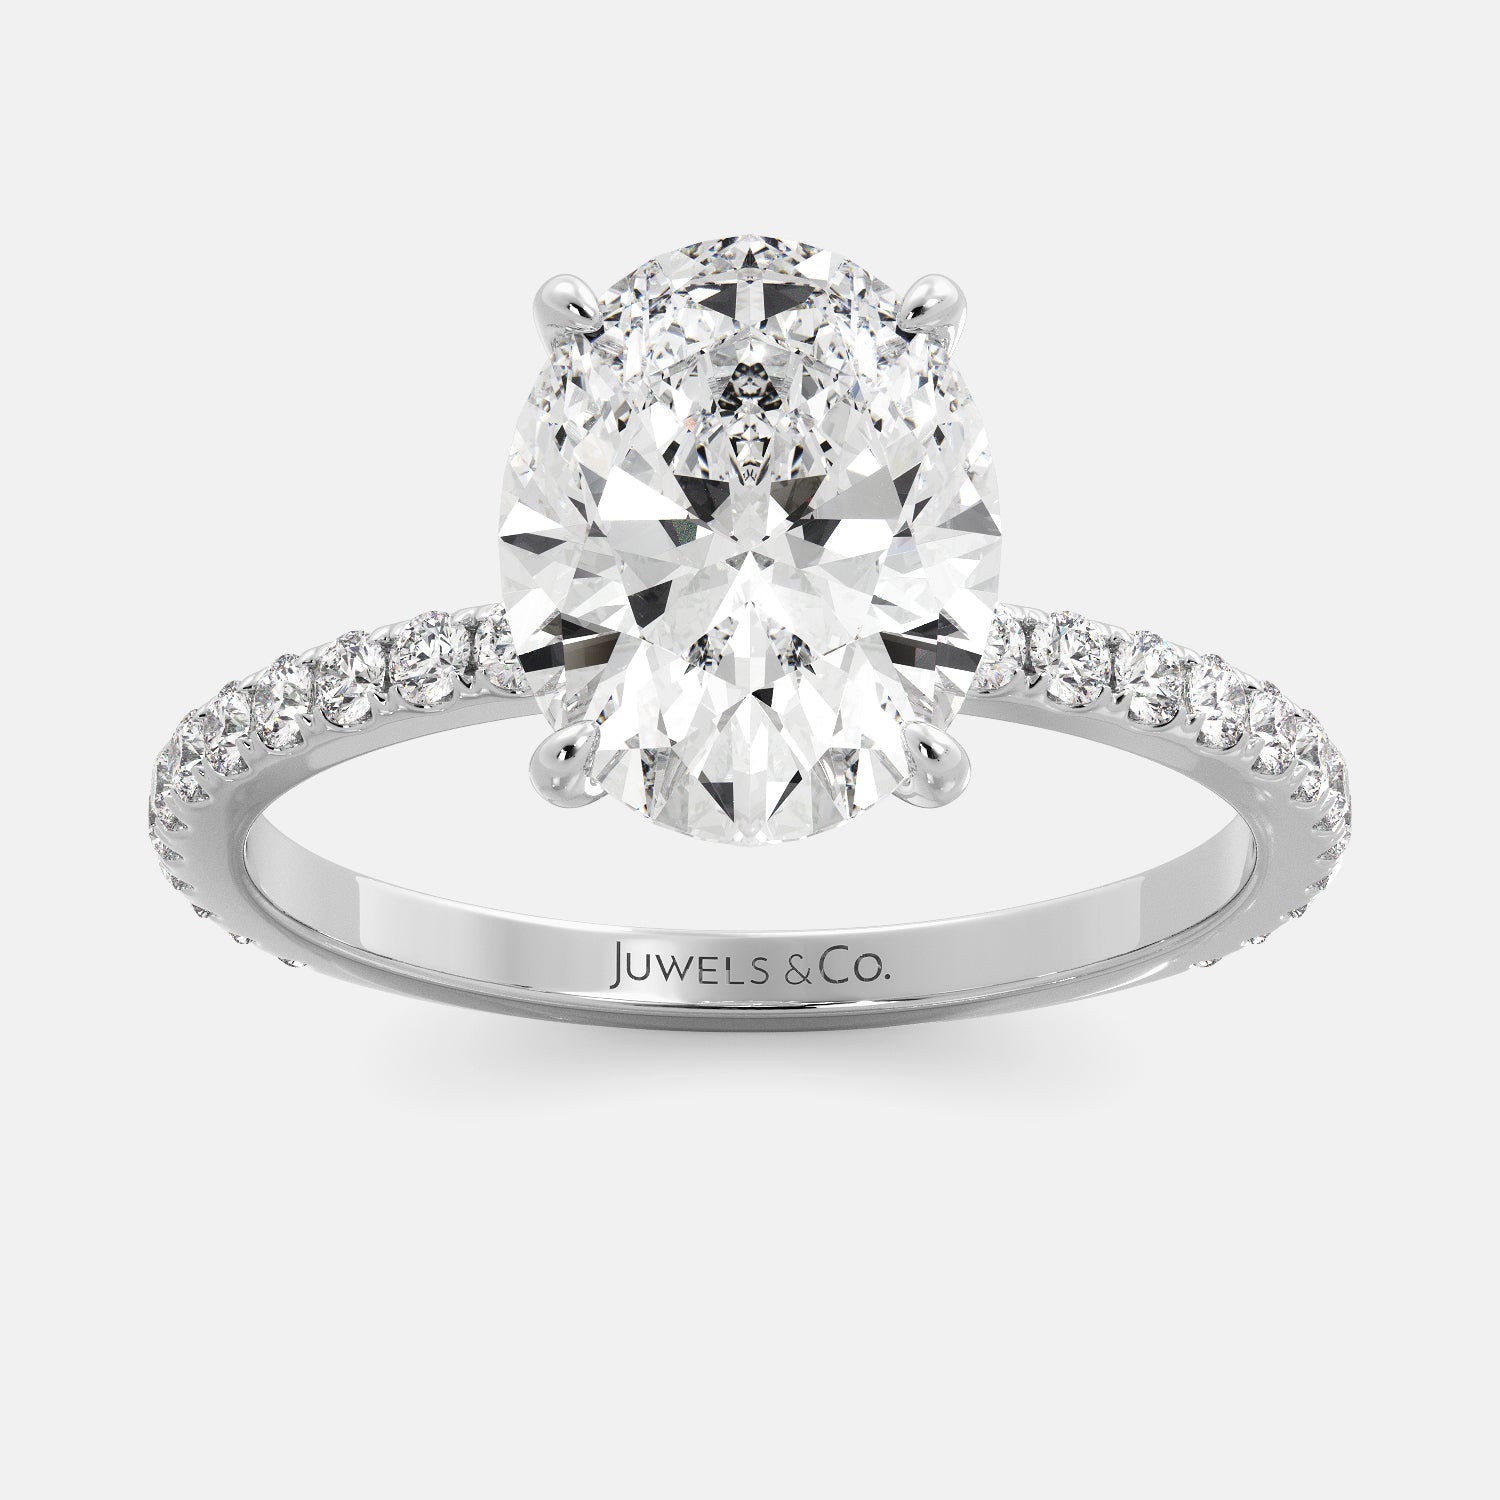 Lab-grown Oval Cut Diamond Ring with pave, 2 carat, white gold 14K